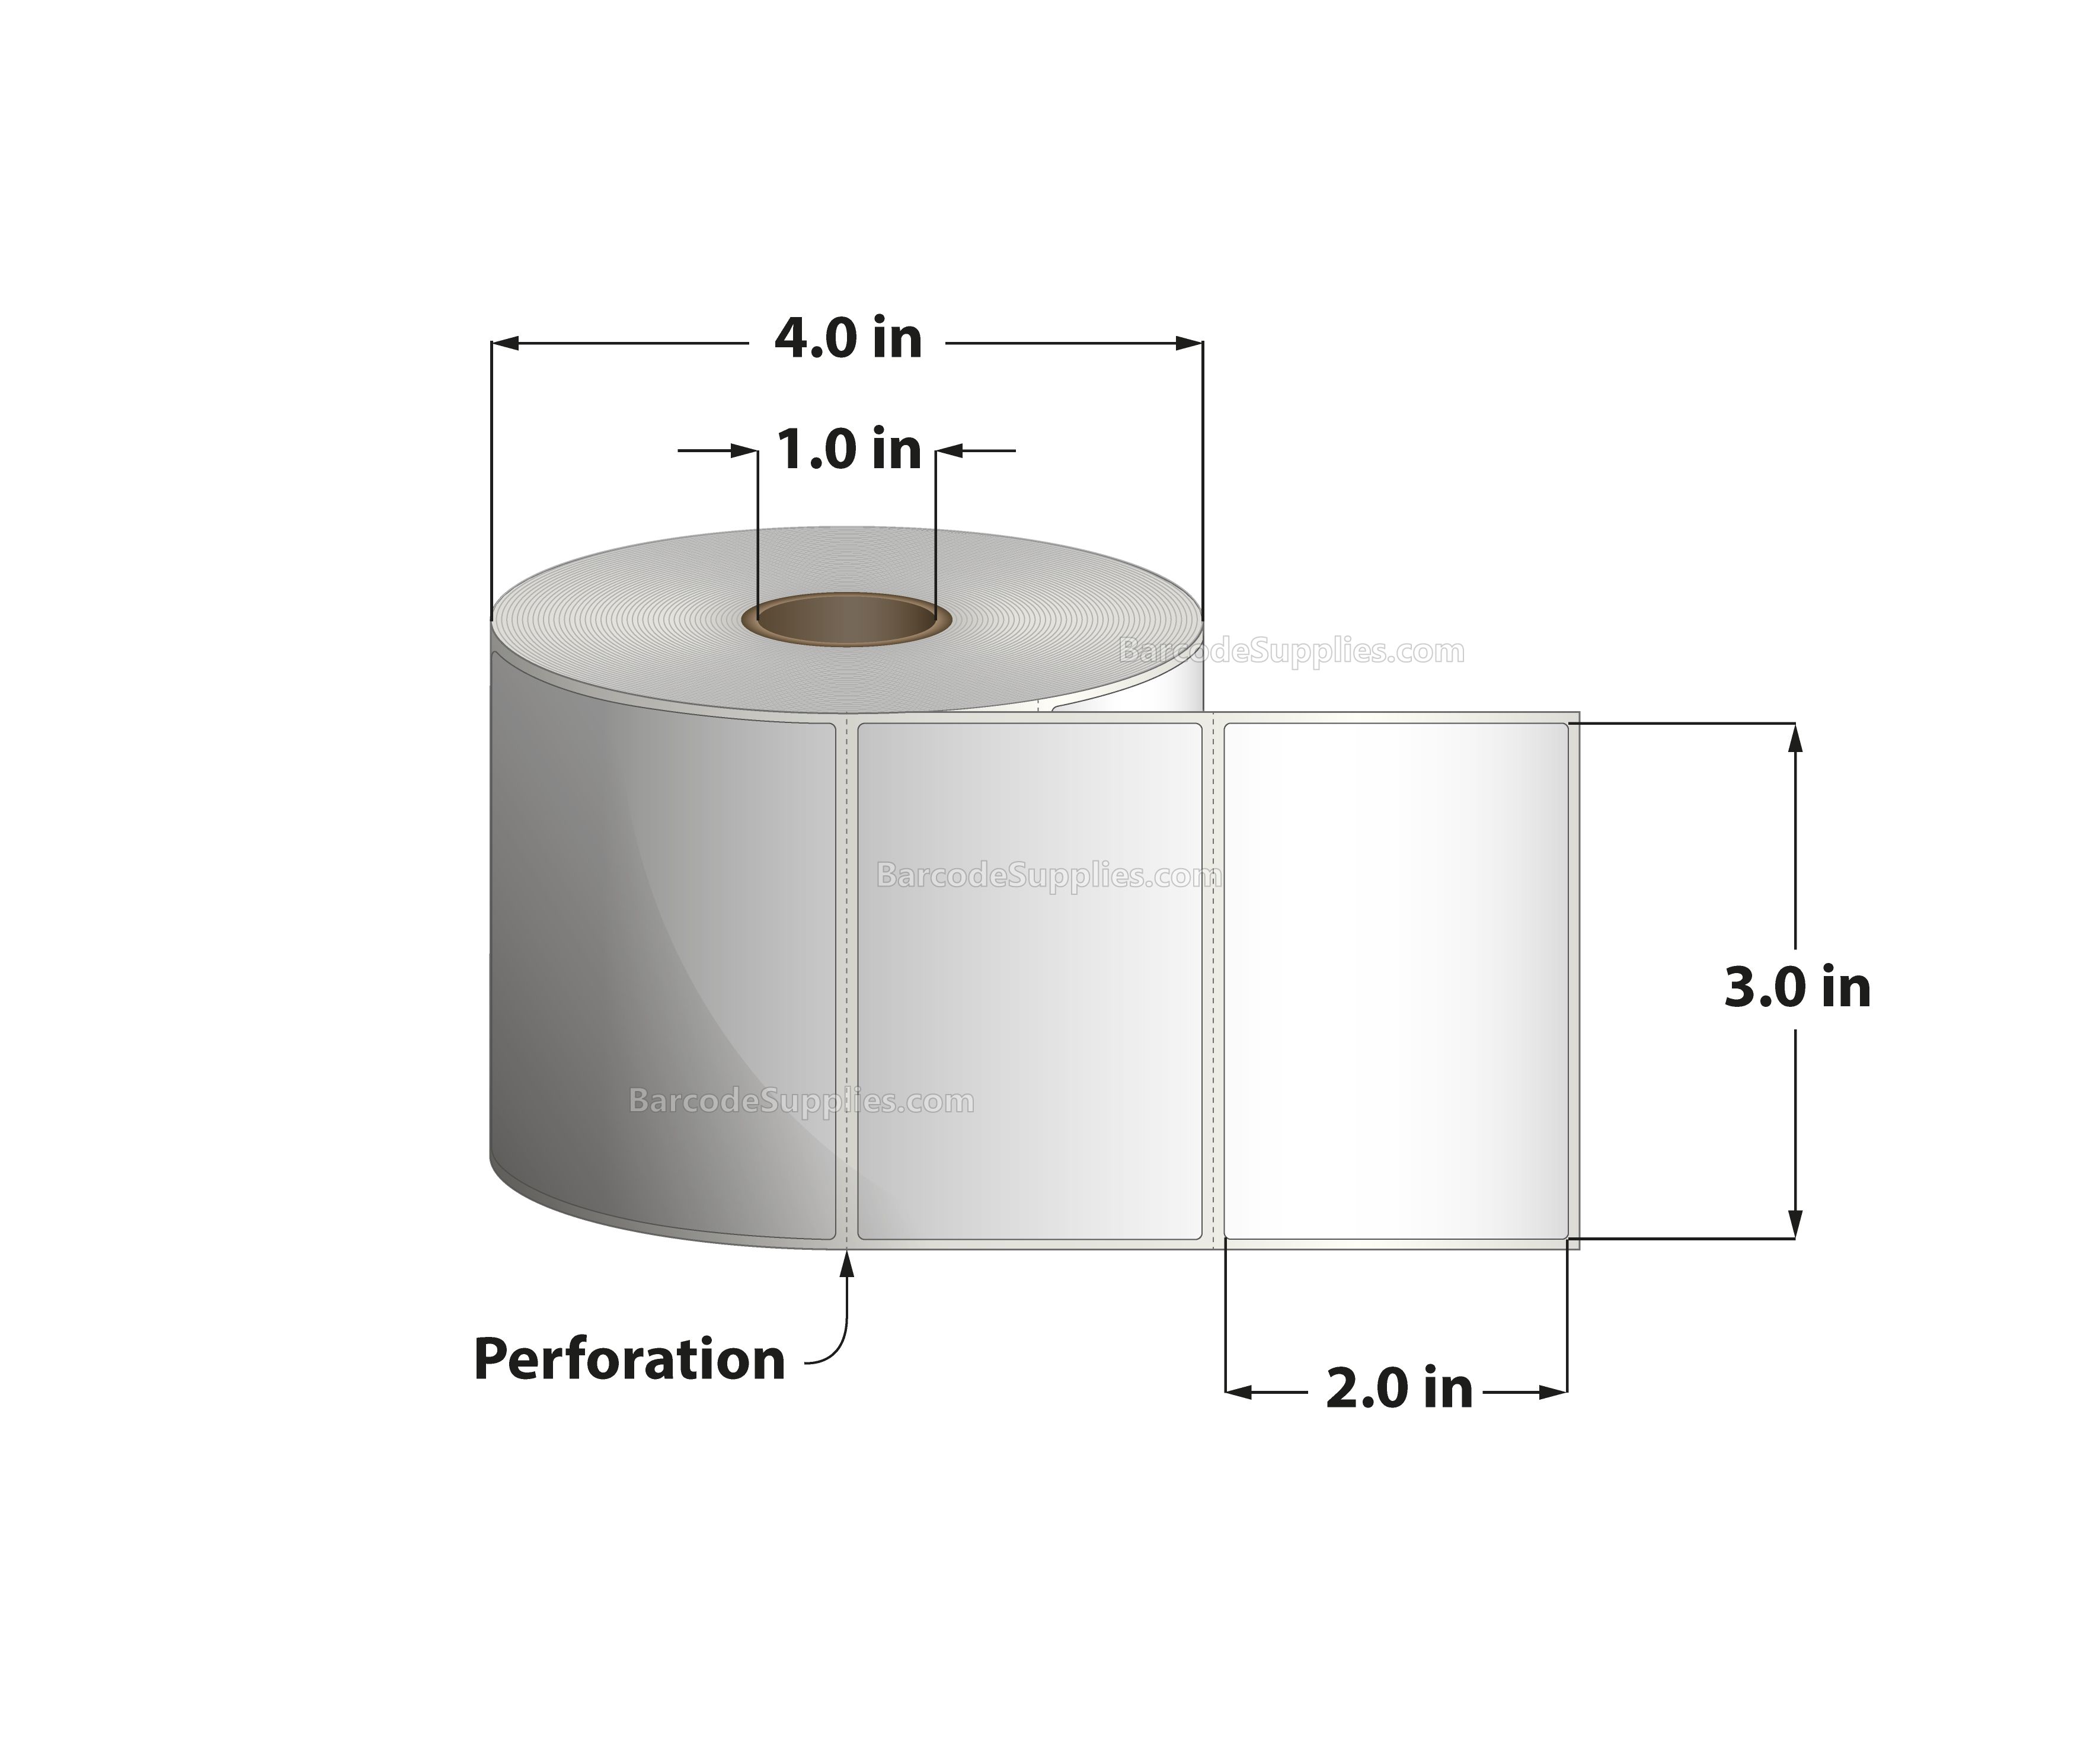 3 x 2 Thermal Transfer White Labels With Permanent Adhesive - Perforated - 735 Labels Per Roll - Carton Of 12 Rolls - 8820 Labels Total - MPN: RT-3-2-735-1 - BarcodeSource, Inc.